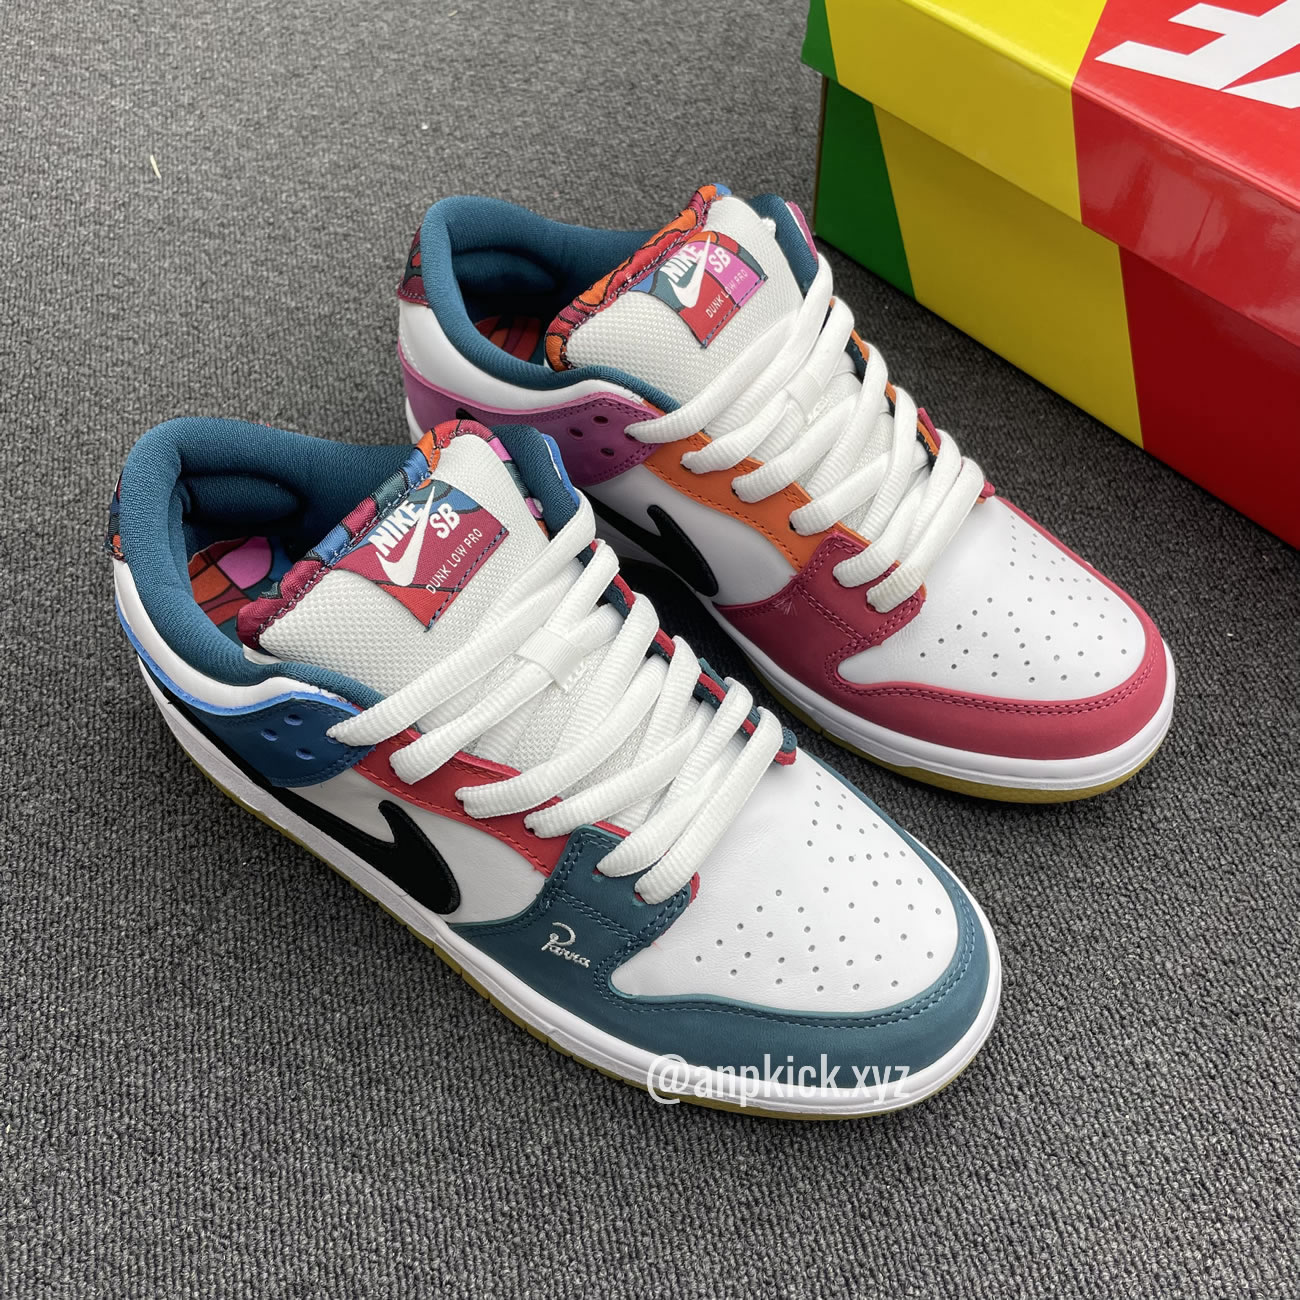 Parra Nike Sb Dunk Low Collab Summer 2021 Colorway Surfaces Dh7695 100 (6) - newkick.org